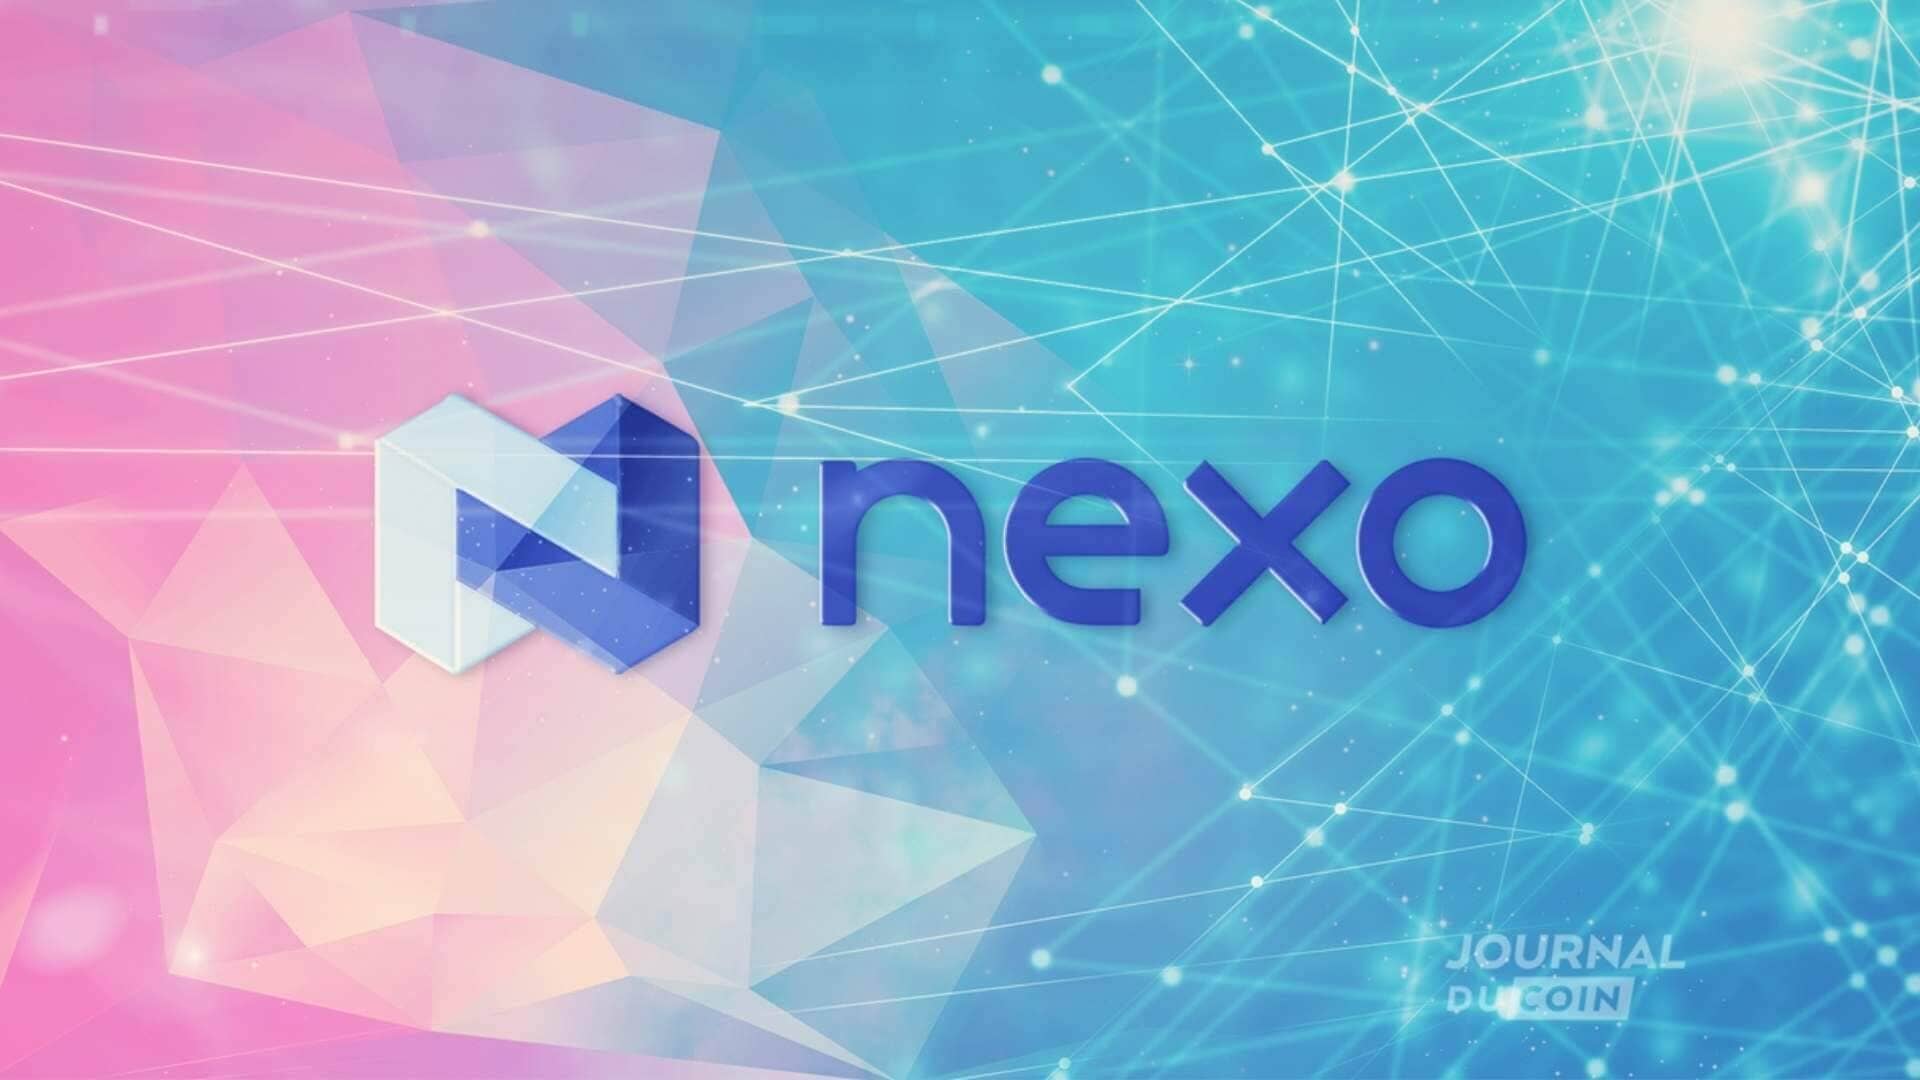 Nexo enters into a partnership with Fidelity Digital Assets to attract institutional clients.